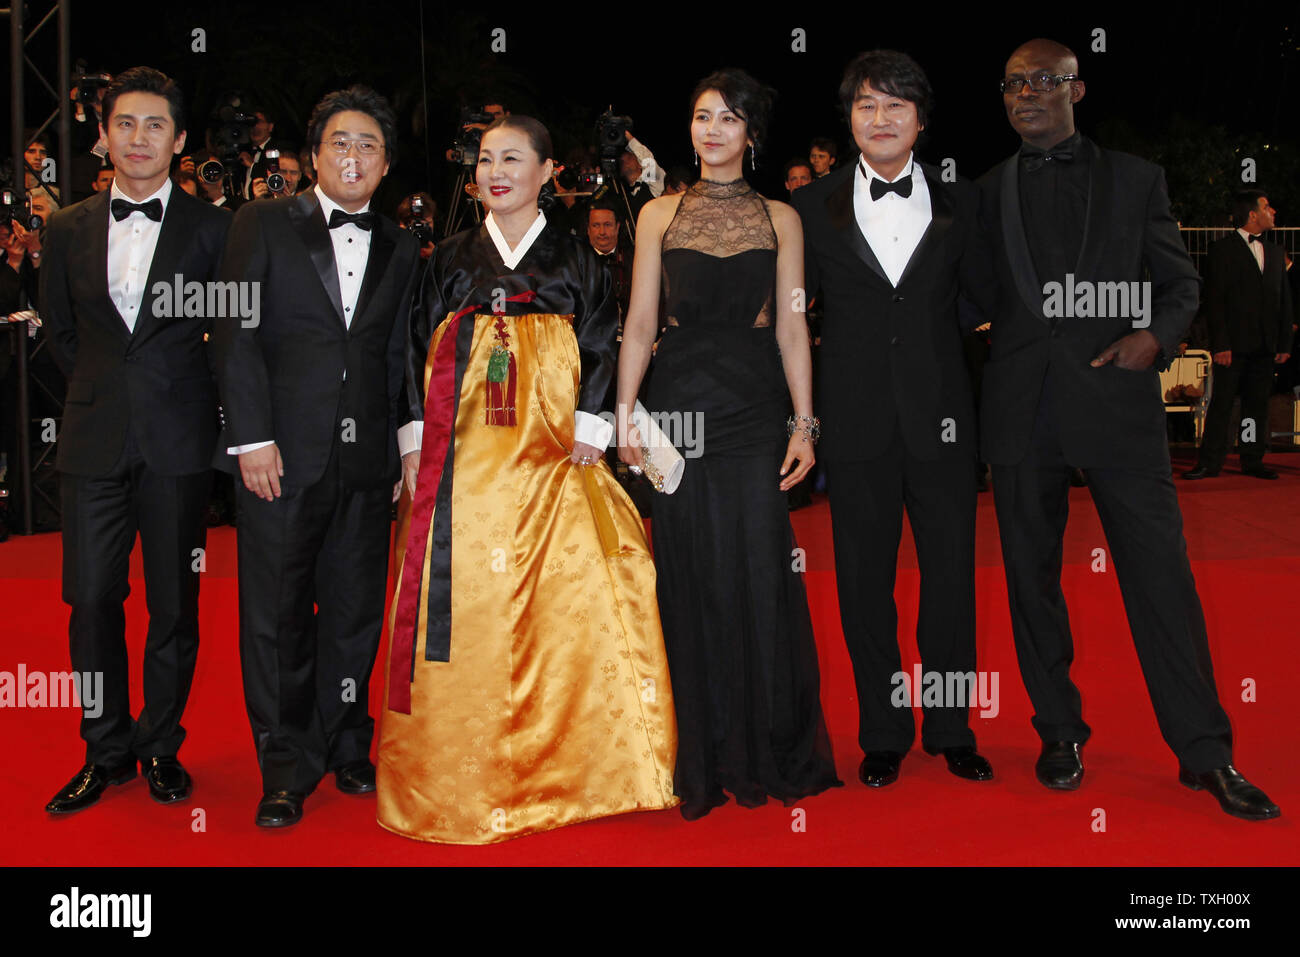 (From L to R) Director Chan-Wook Park, actors Kim Ok-Vin, Kim Hae-Sook, Song Kang-Ho, Shin Ha-Kyun and Eriq Ebouaney arrive on the red carpet before a screening of the film 'Thirst' at the 62nd annual Cannes Film Festival in Cannes, France on May 15, 2009.   (UPI Photo/David Silpa) Stock Photo